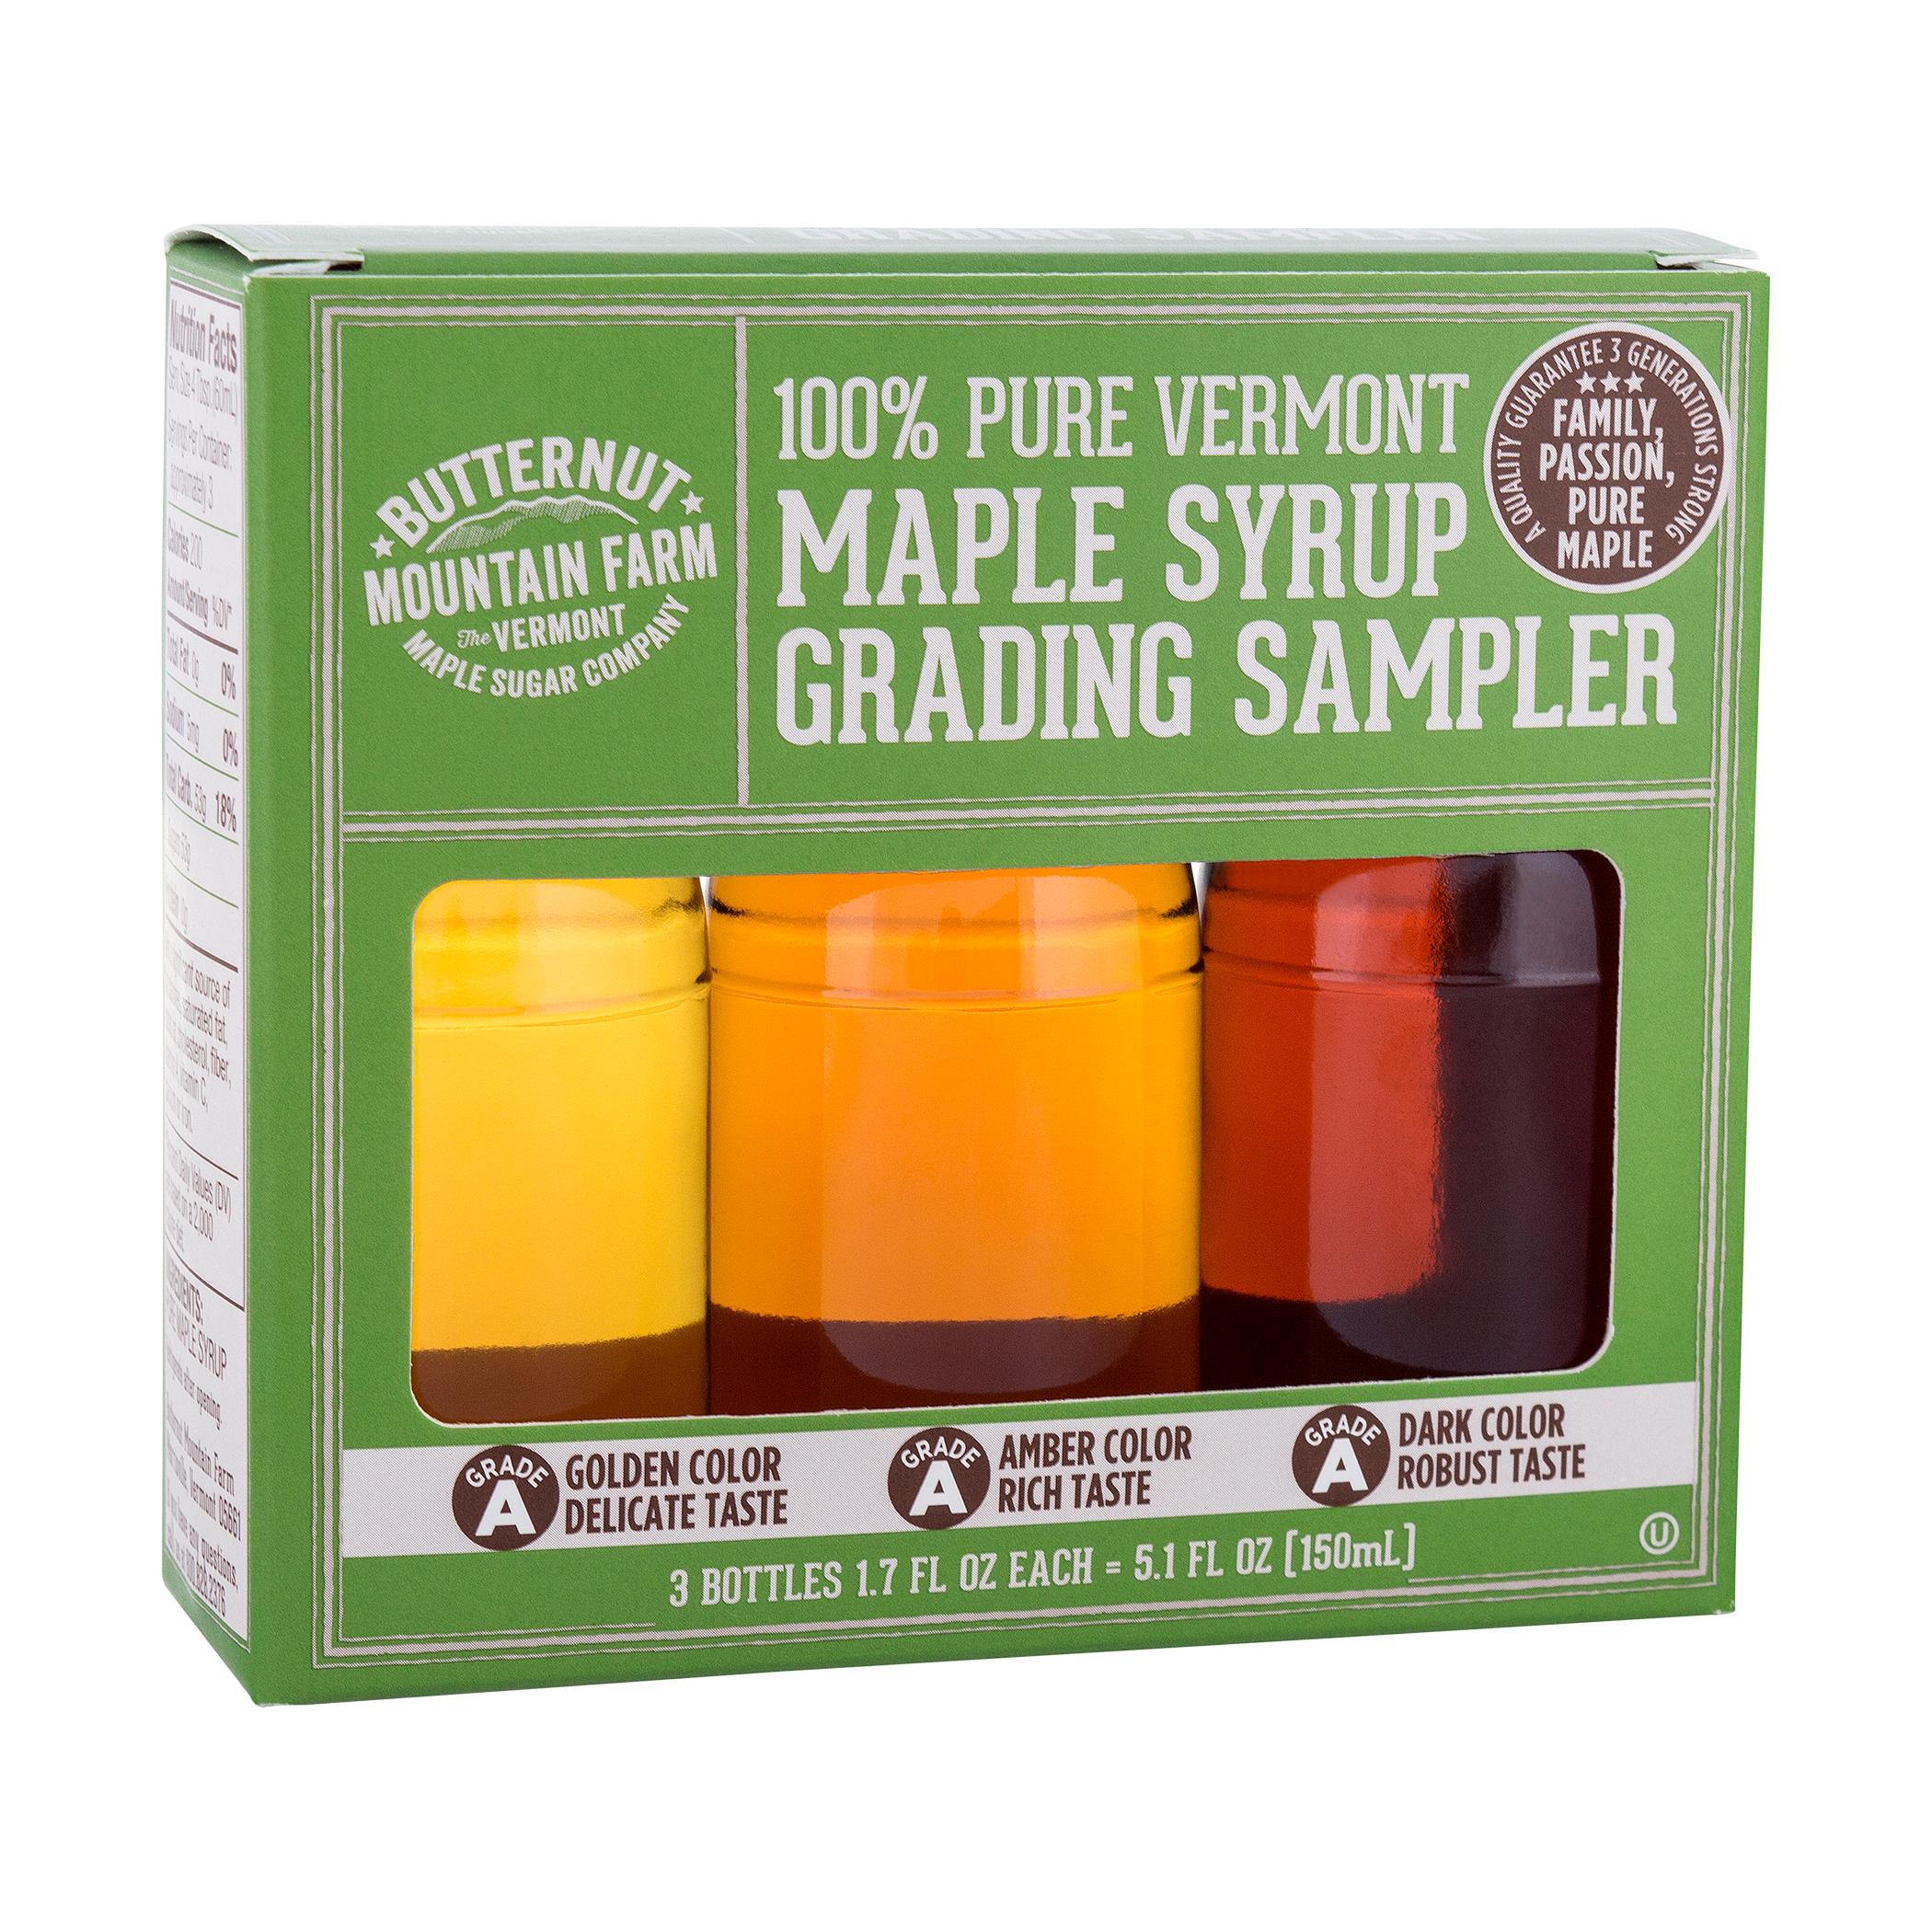  Pure Vermont Maple Syrup Grade Sampler